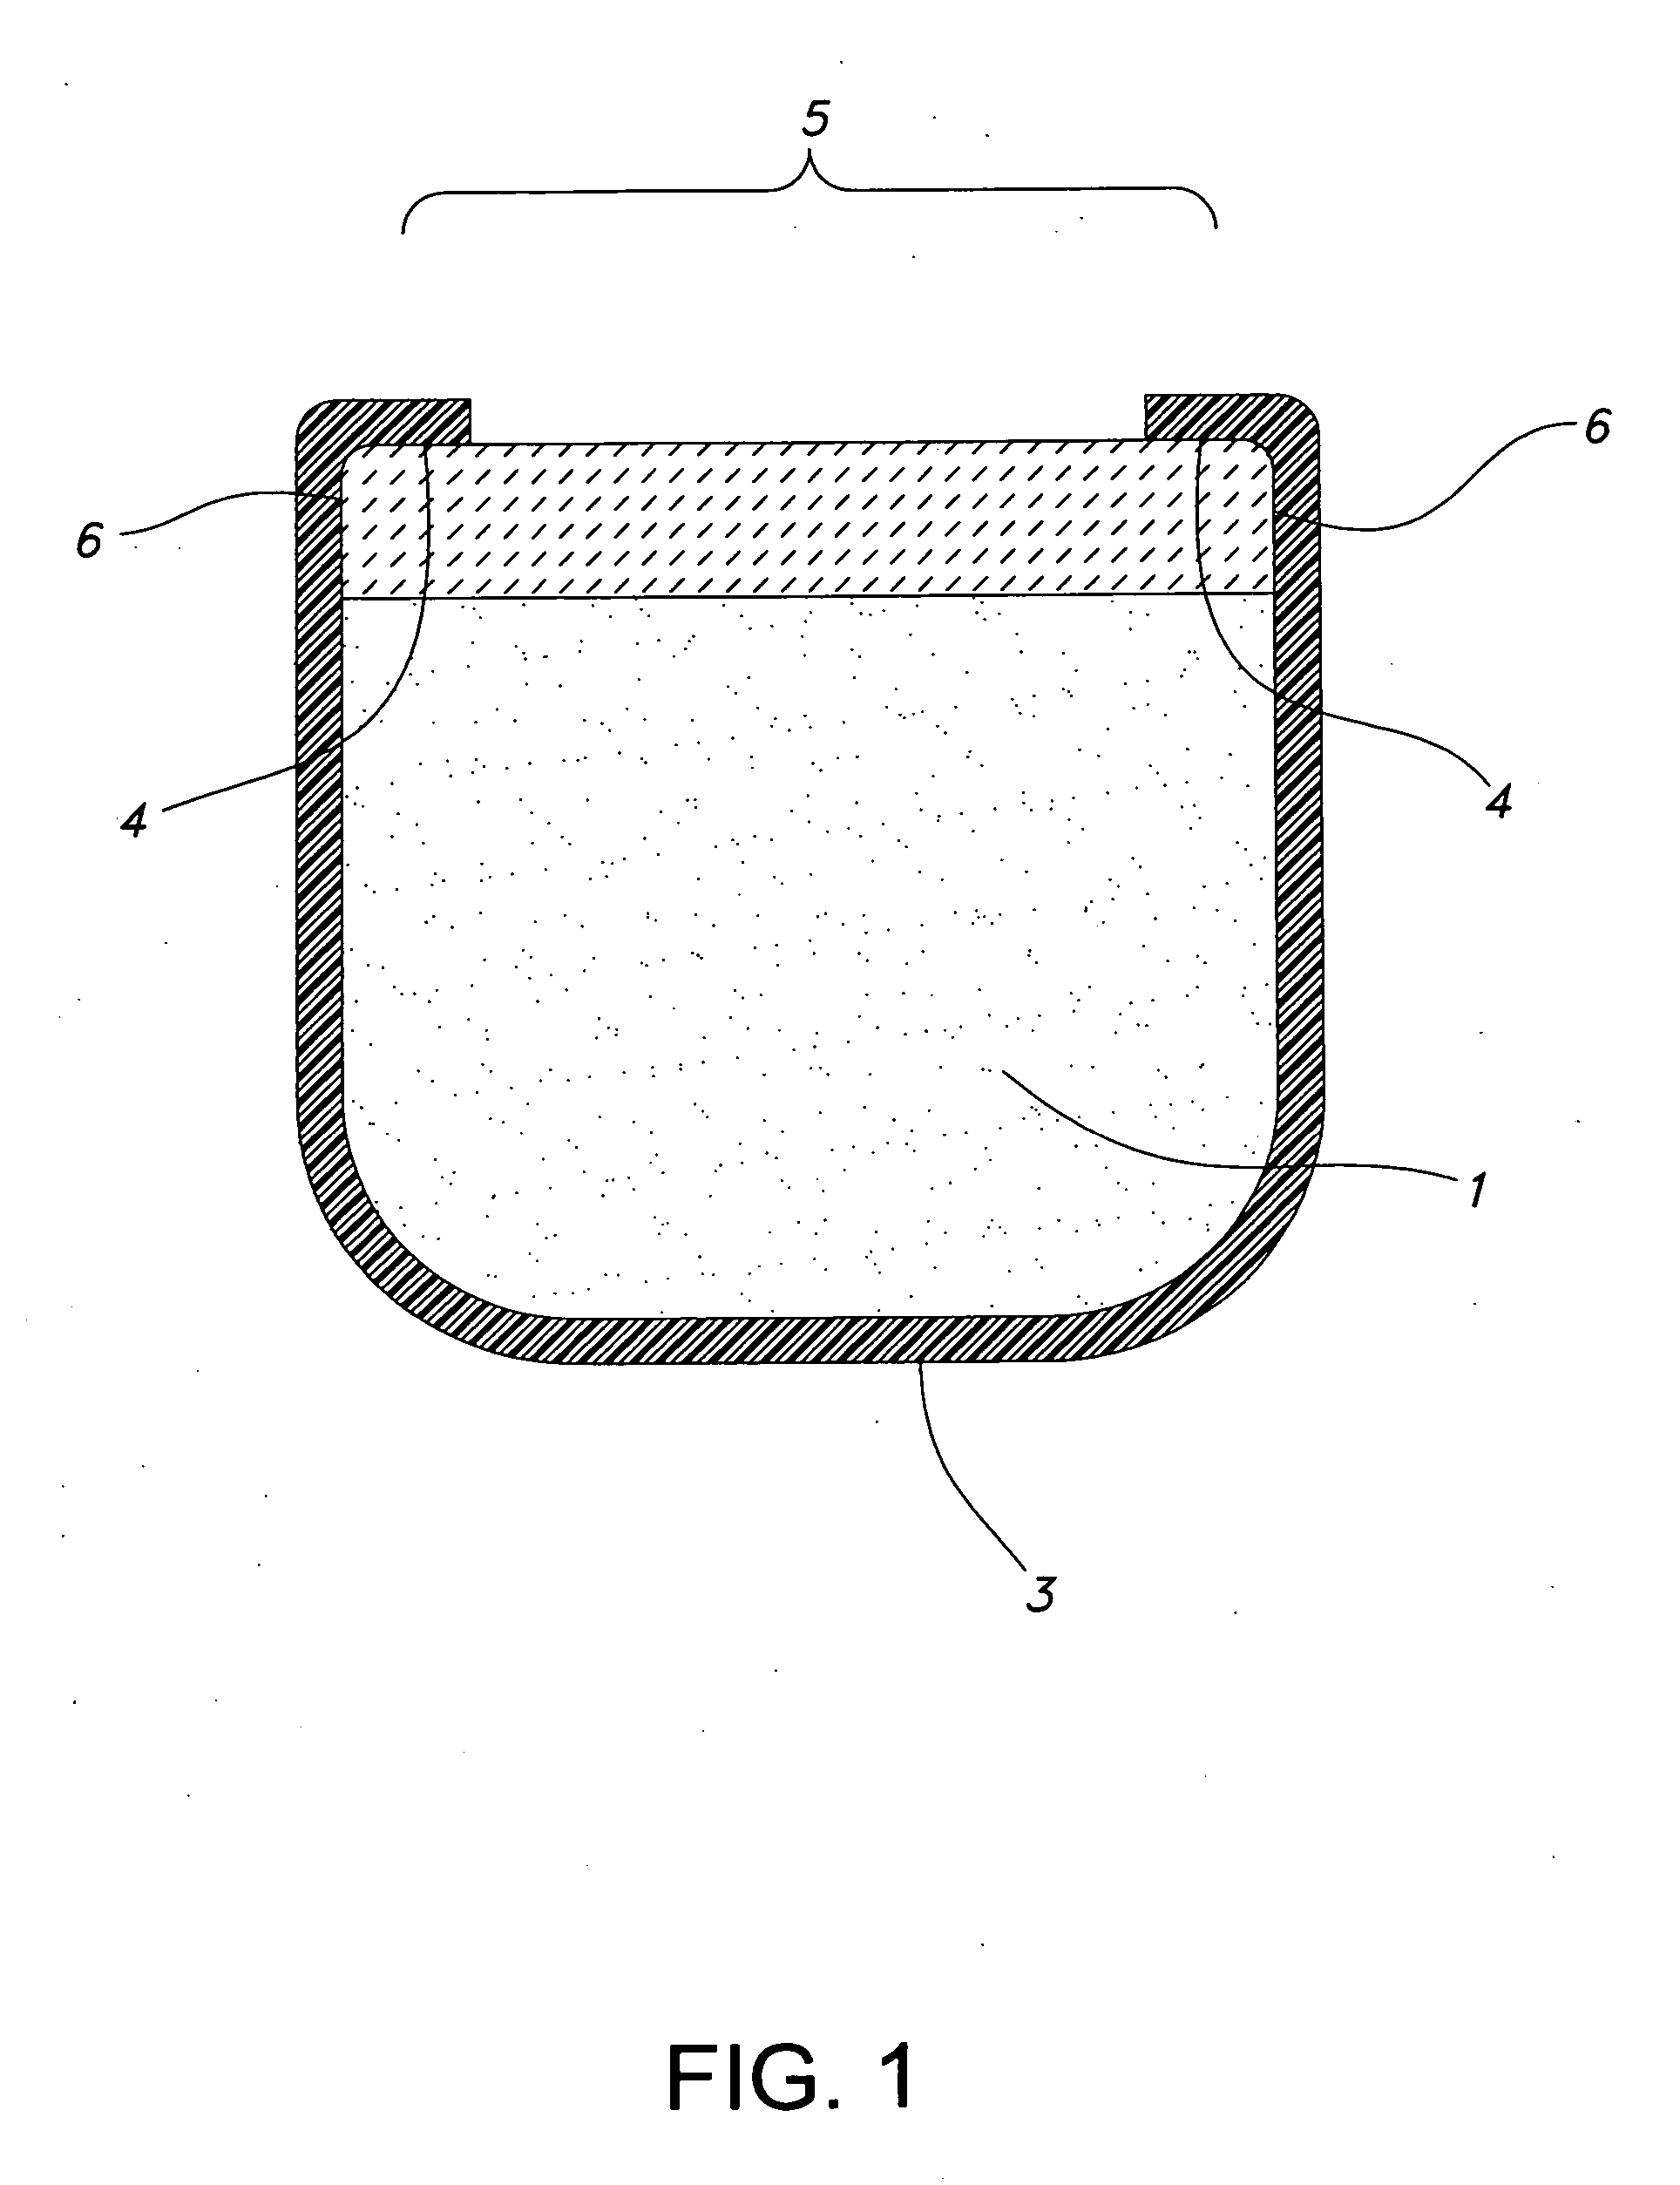 Process for preparing poly(vinyl alcohol) drug delivery devices